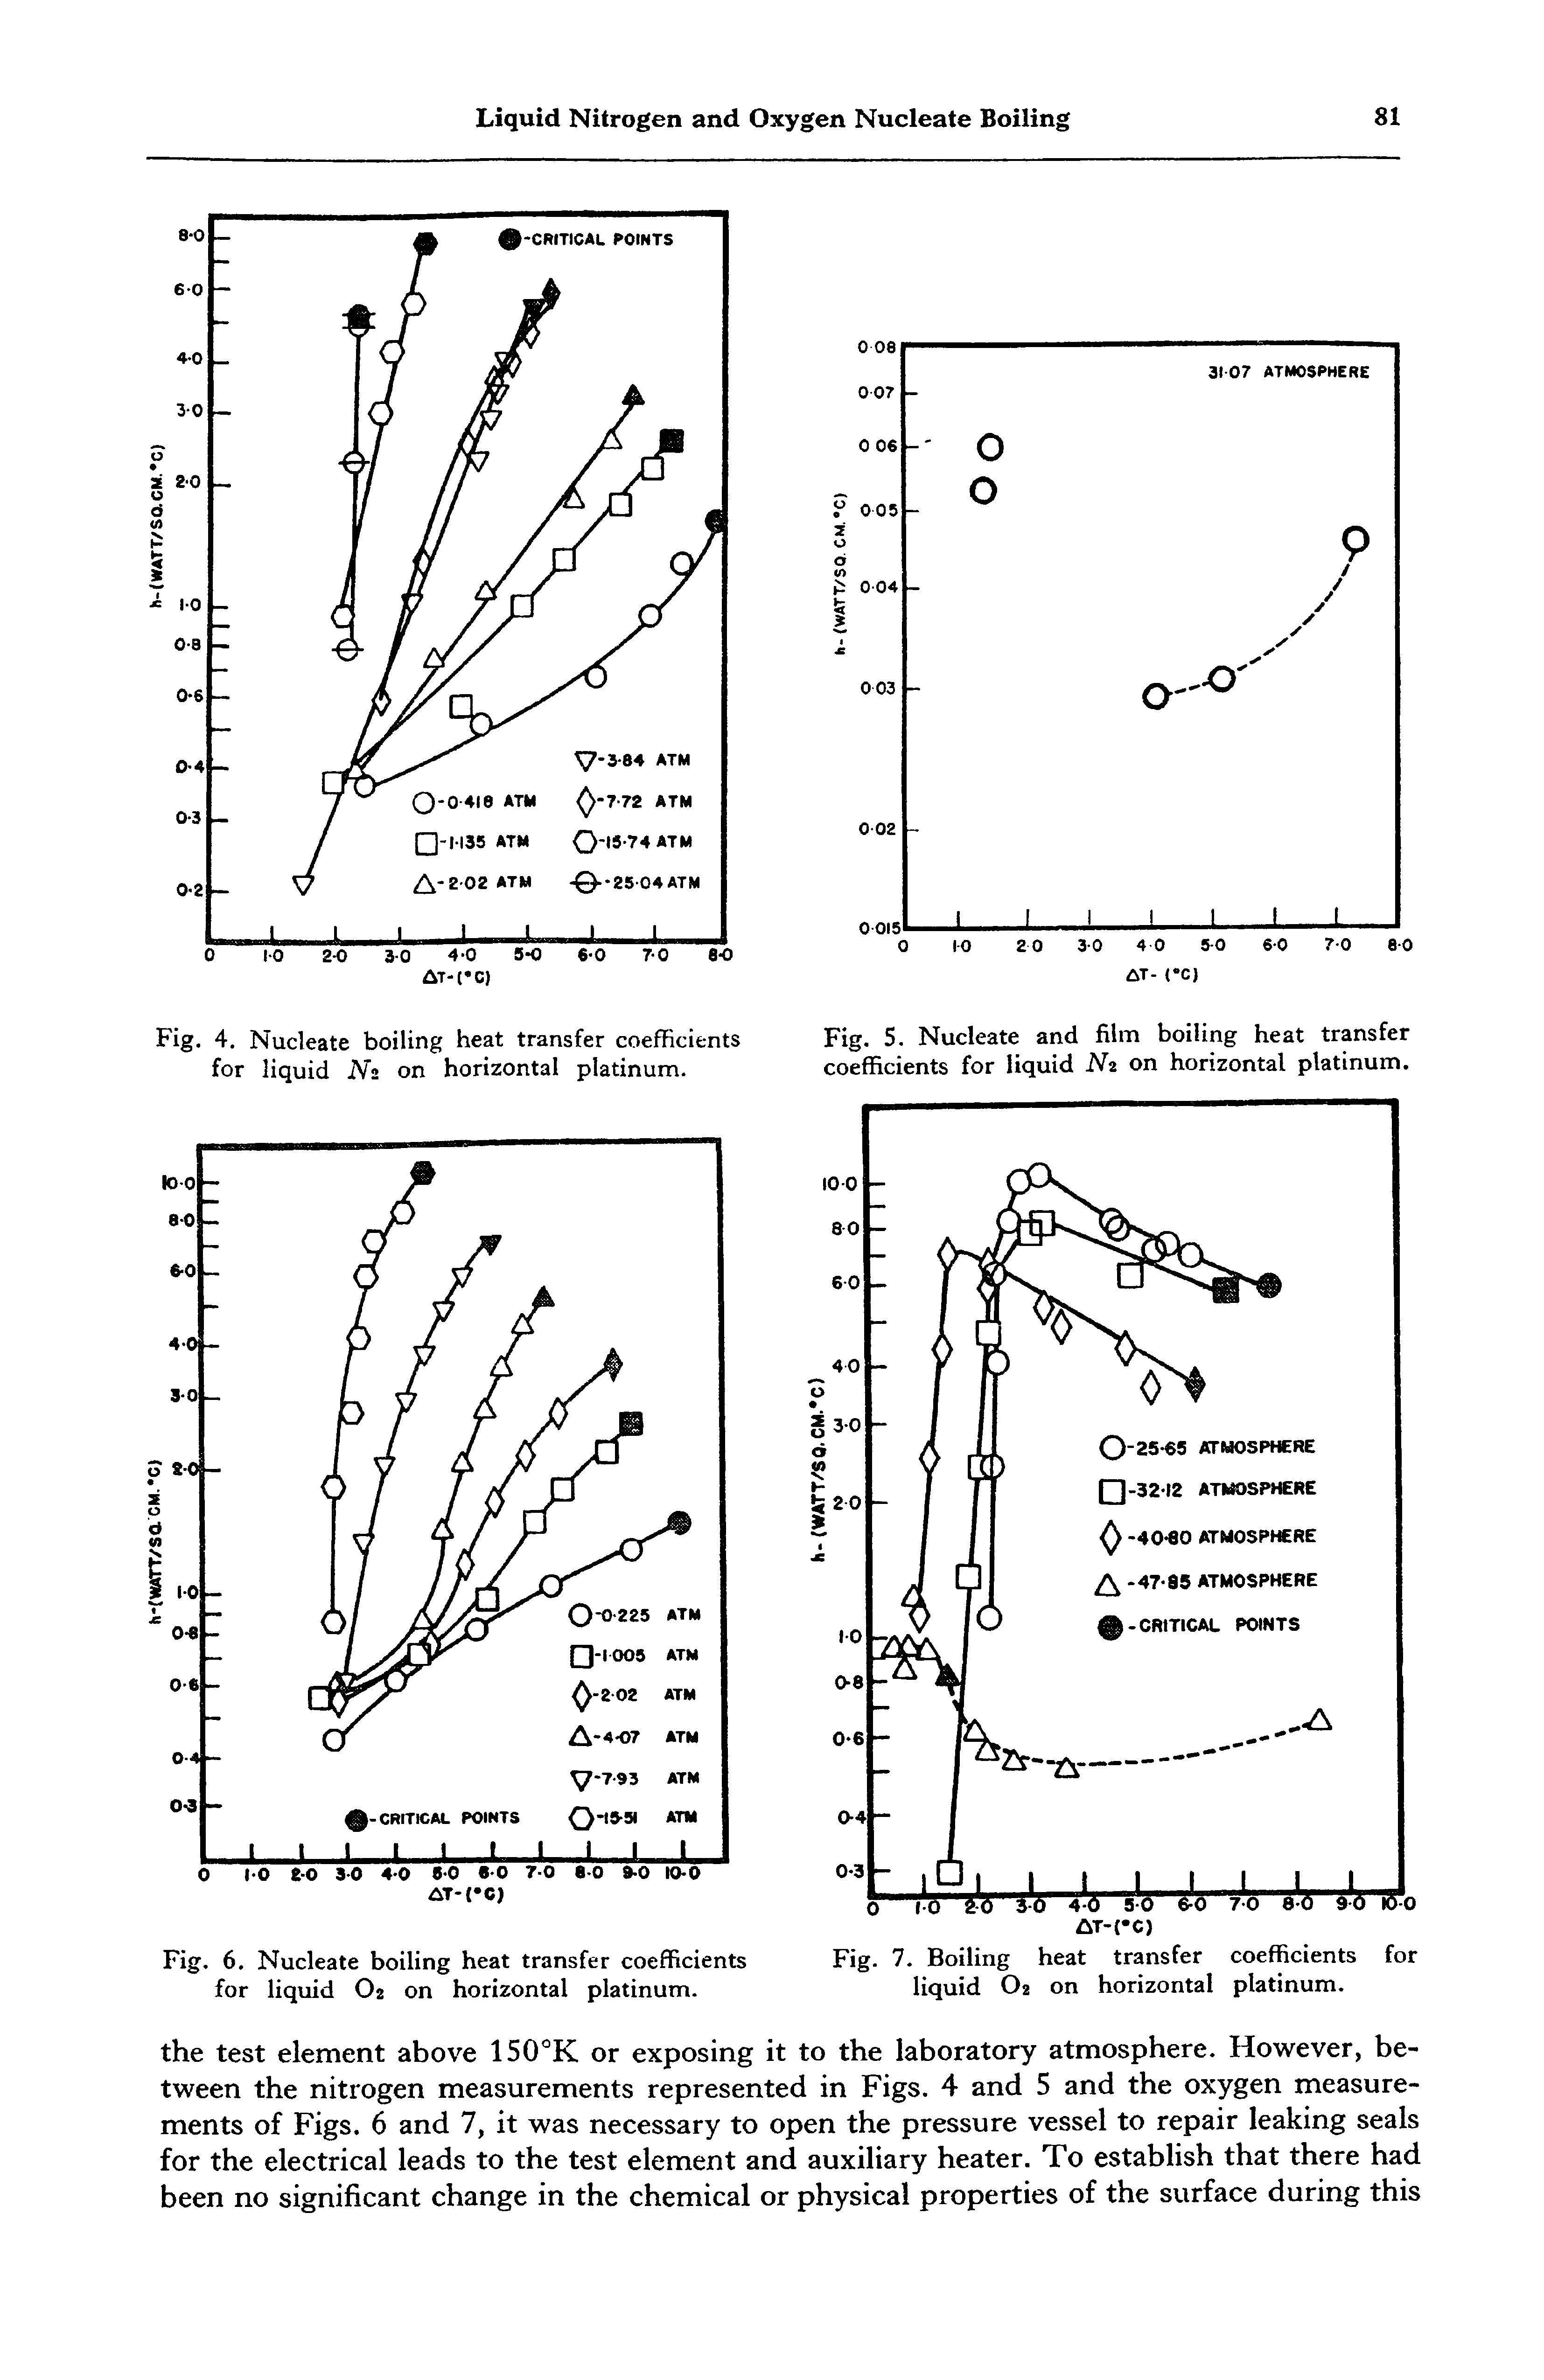 Fig. 4. Nucleate boiling heat transfer coefficients for liquid Nz on horizontal platinum.